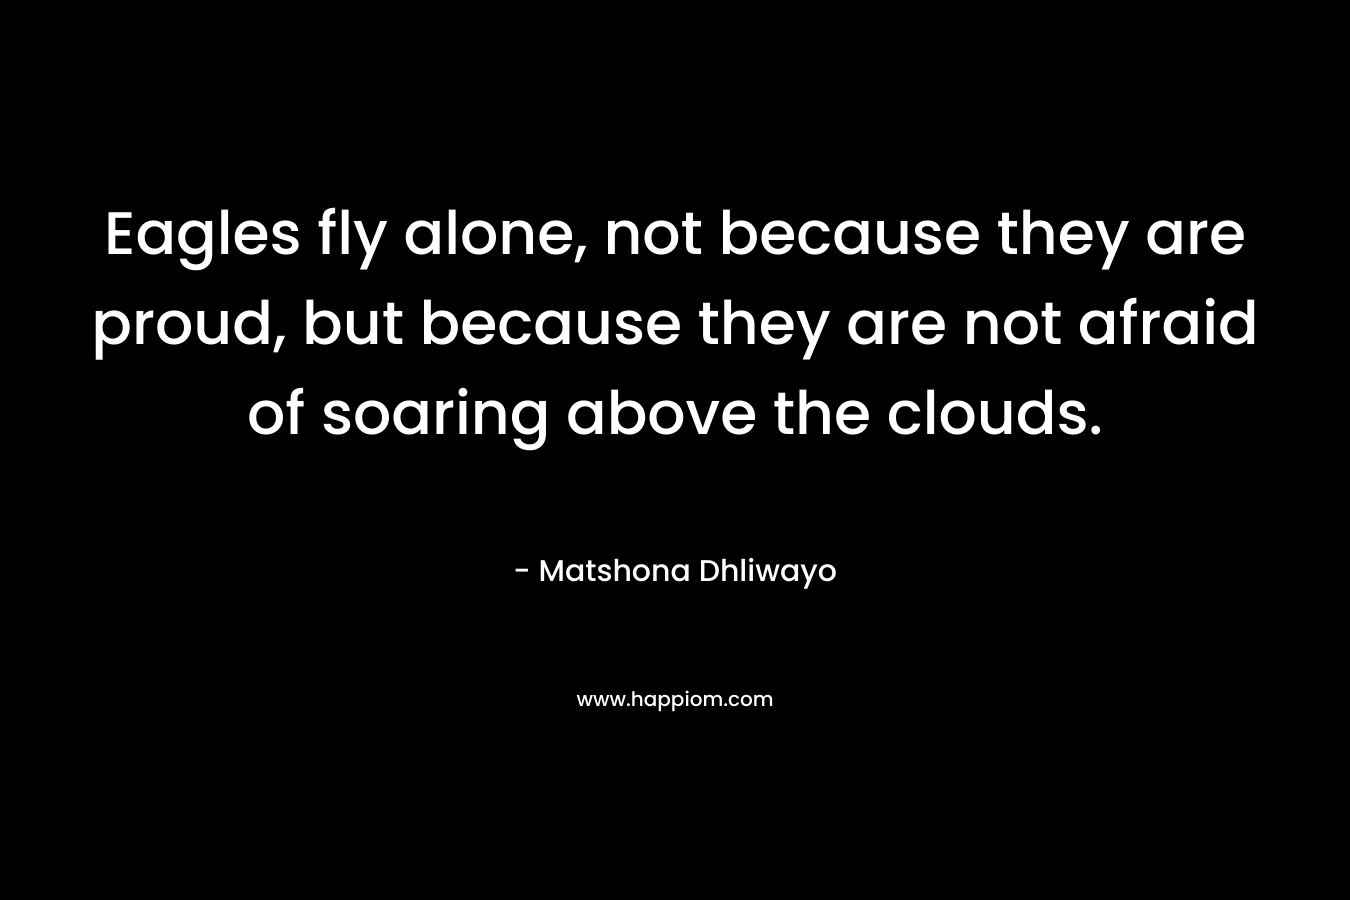 Eagles fly alone, not because they are proud, but because they are not afraid of soaring above the clouds. – Matshona Dhliwayo